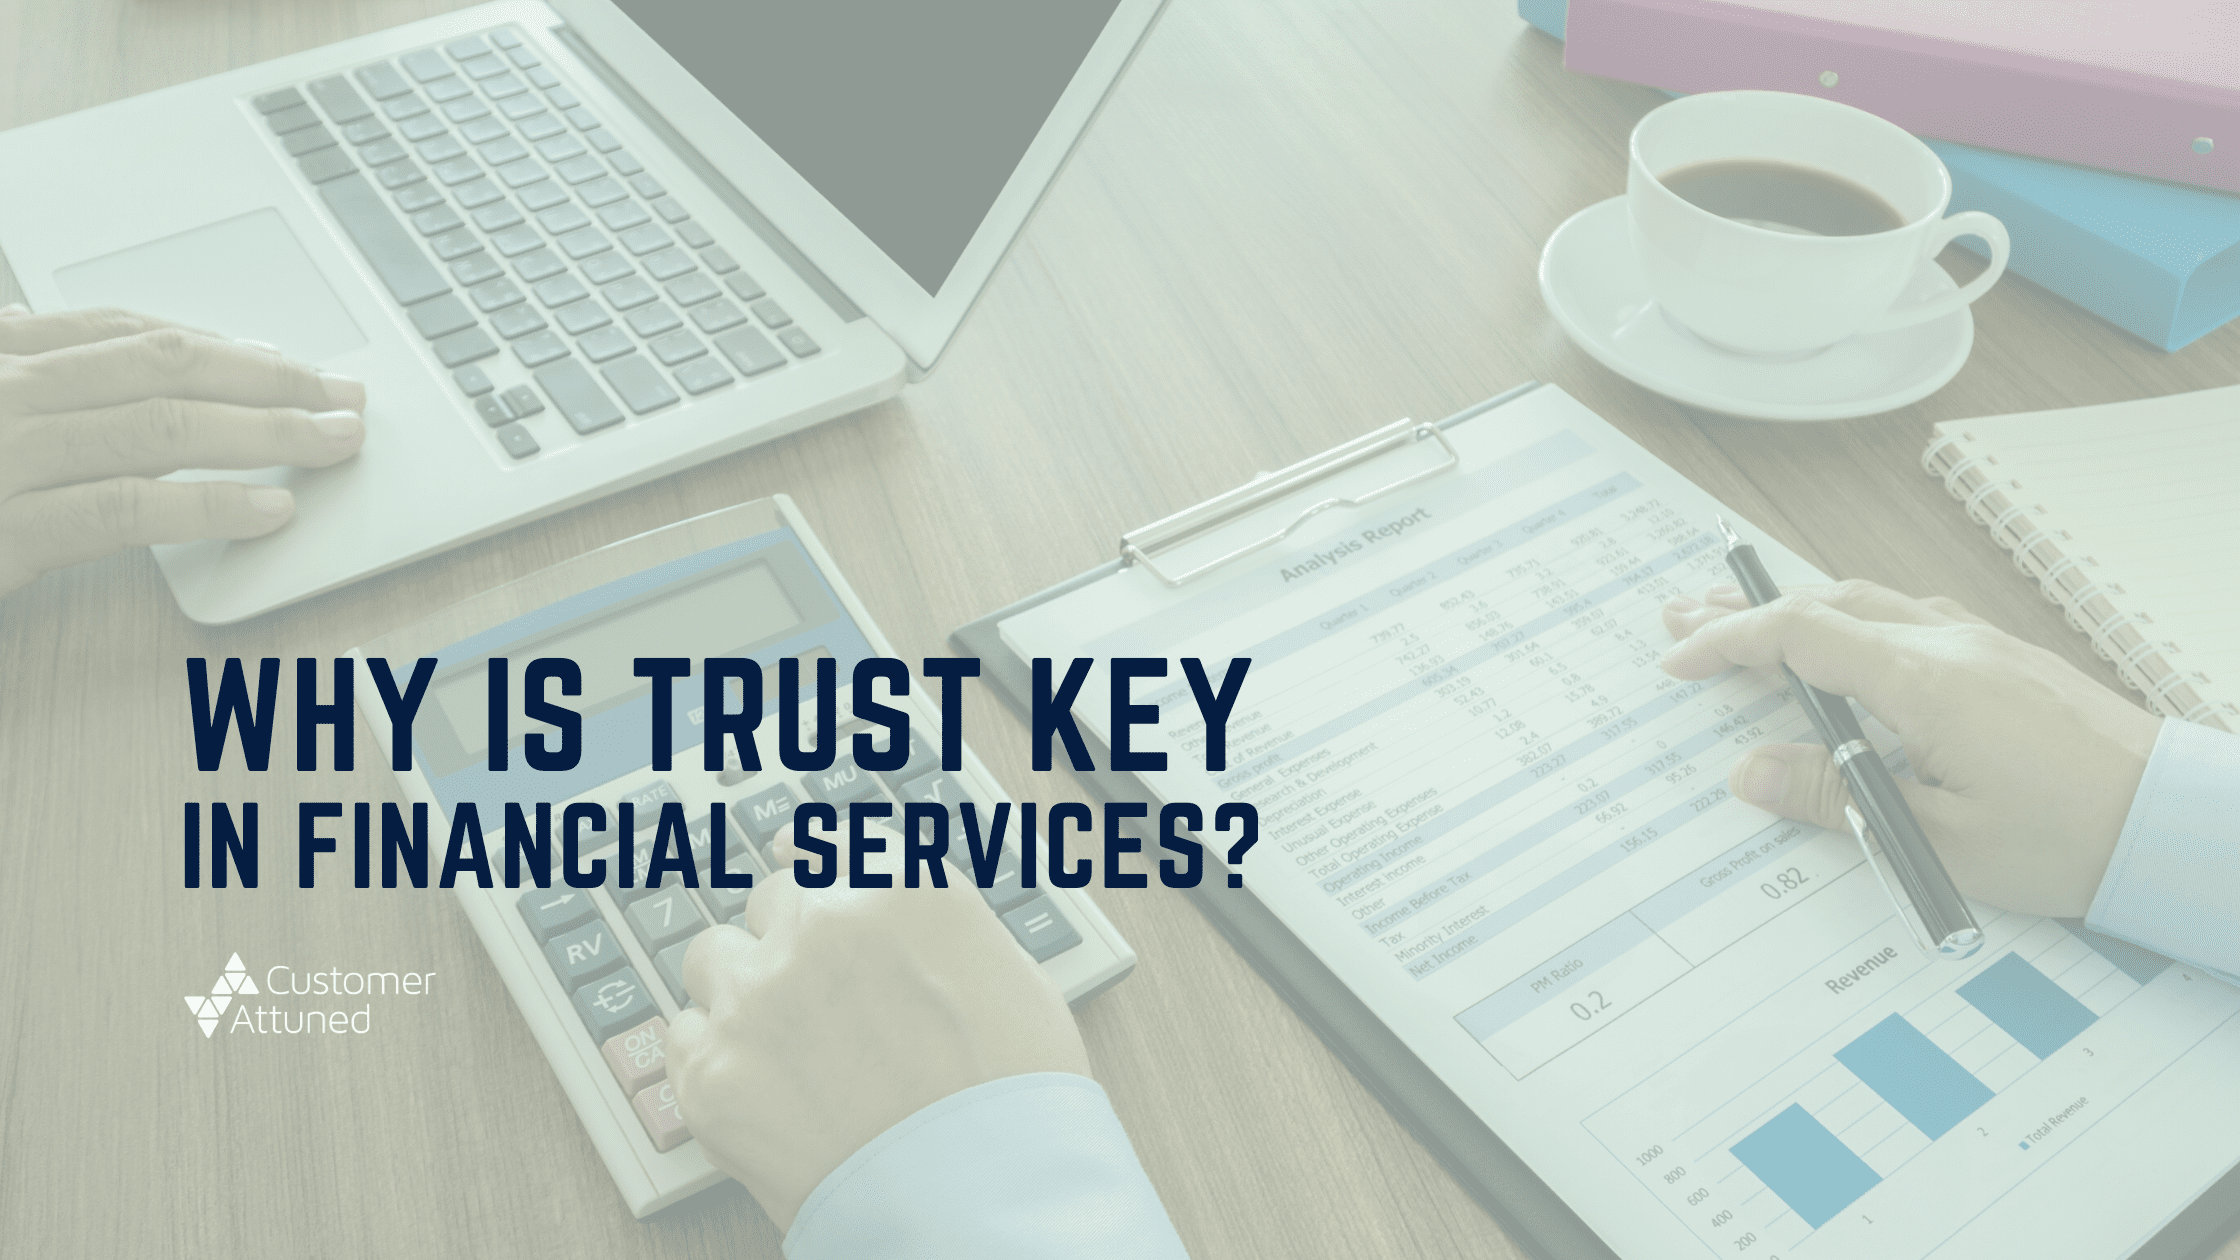 Why is Trust Key in Financial Services?